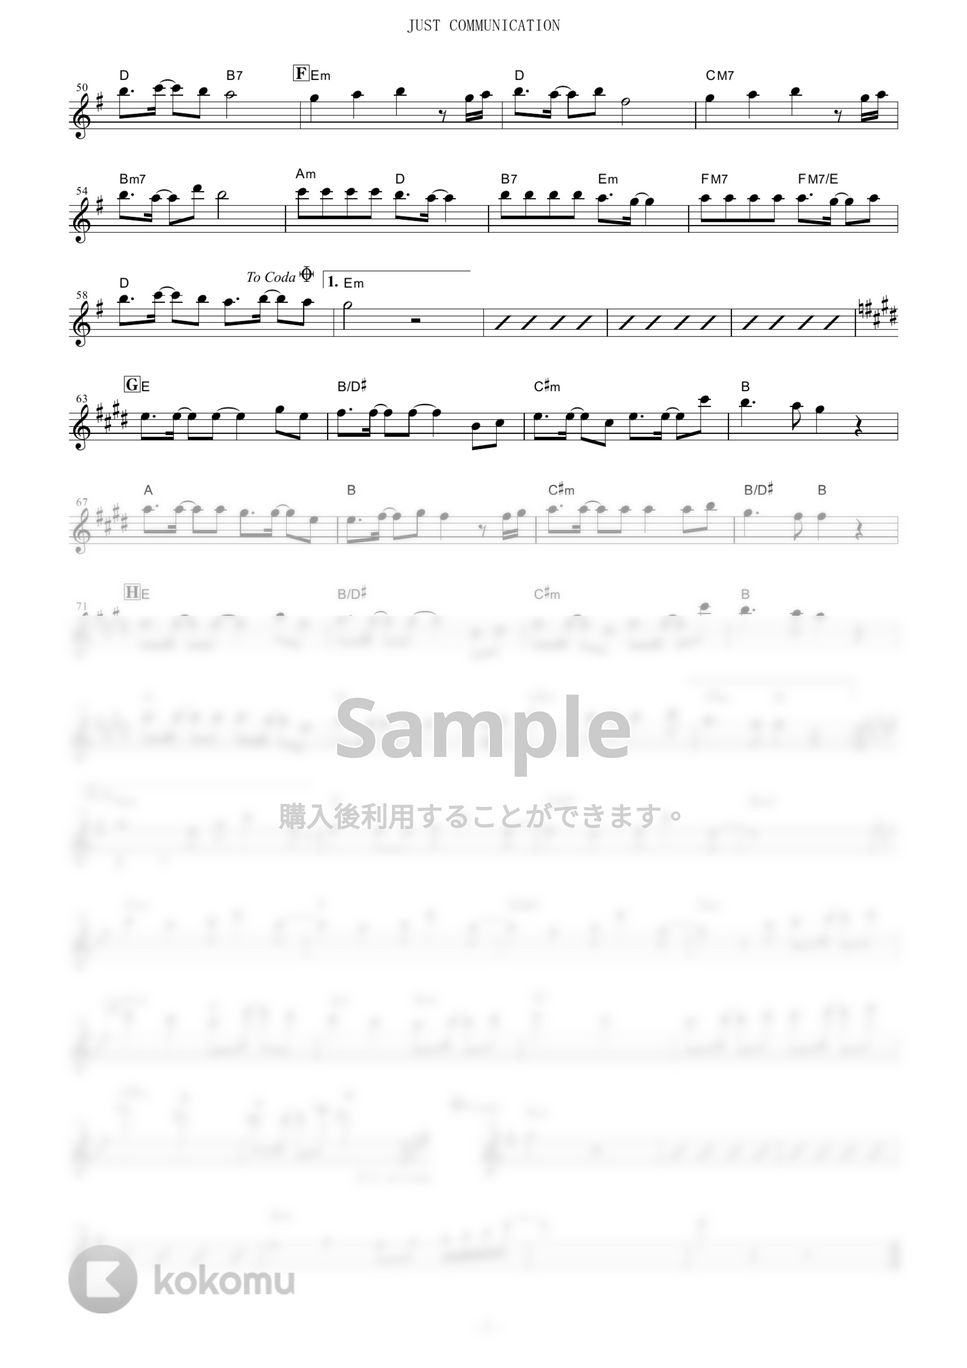 TWO-MIX - JUST COMMUNICATION (『新機動戦記ガンダムW』 / in Bb) by muta-sax